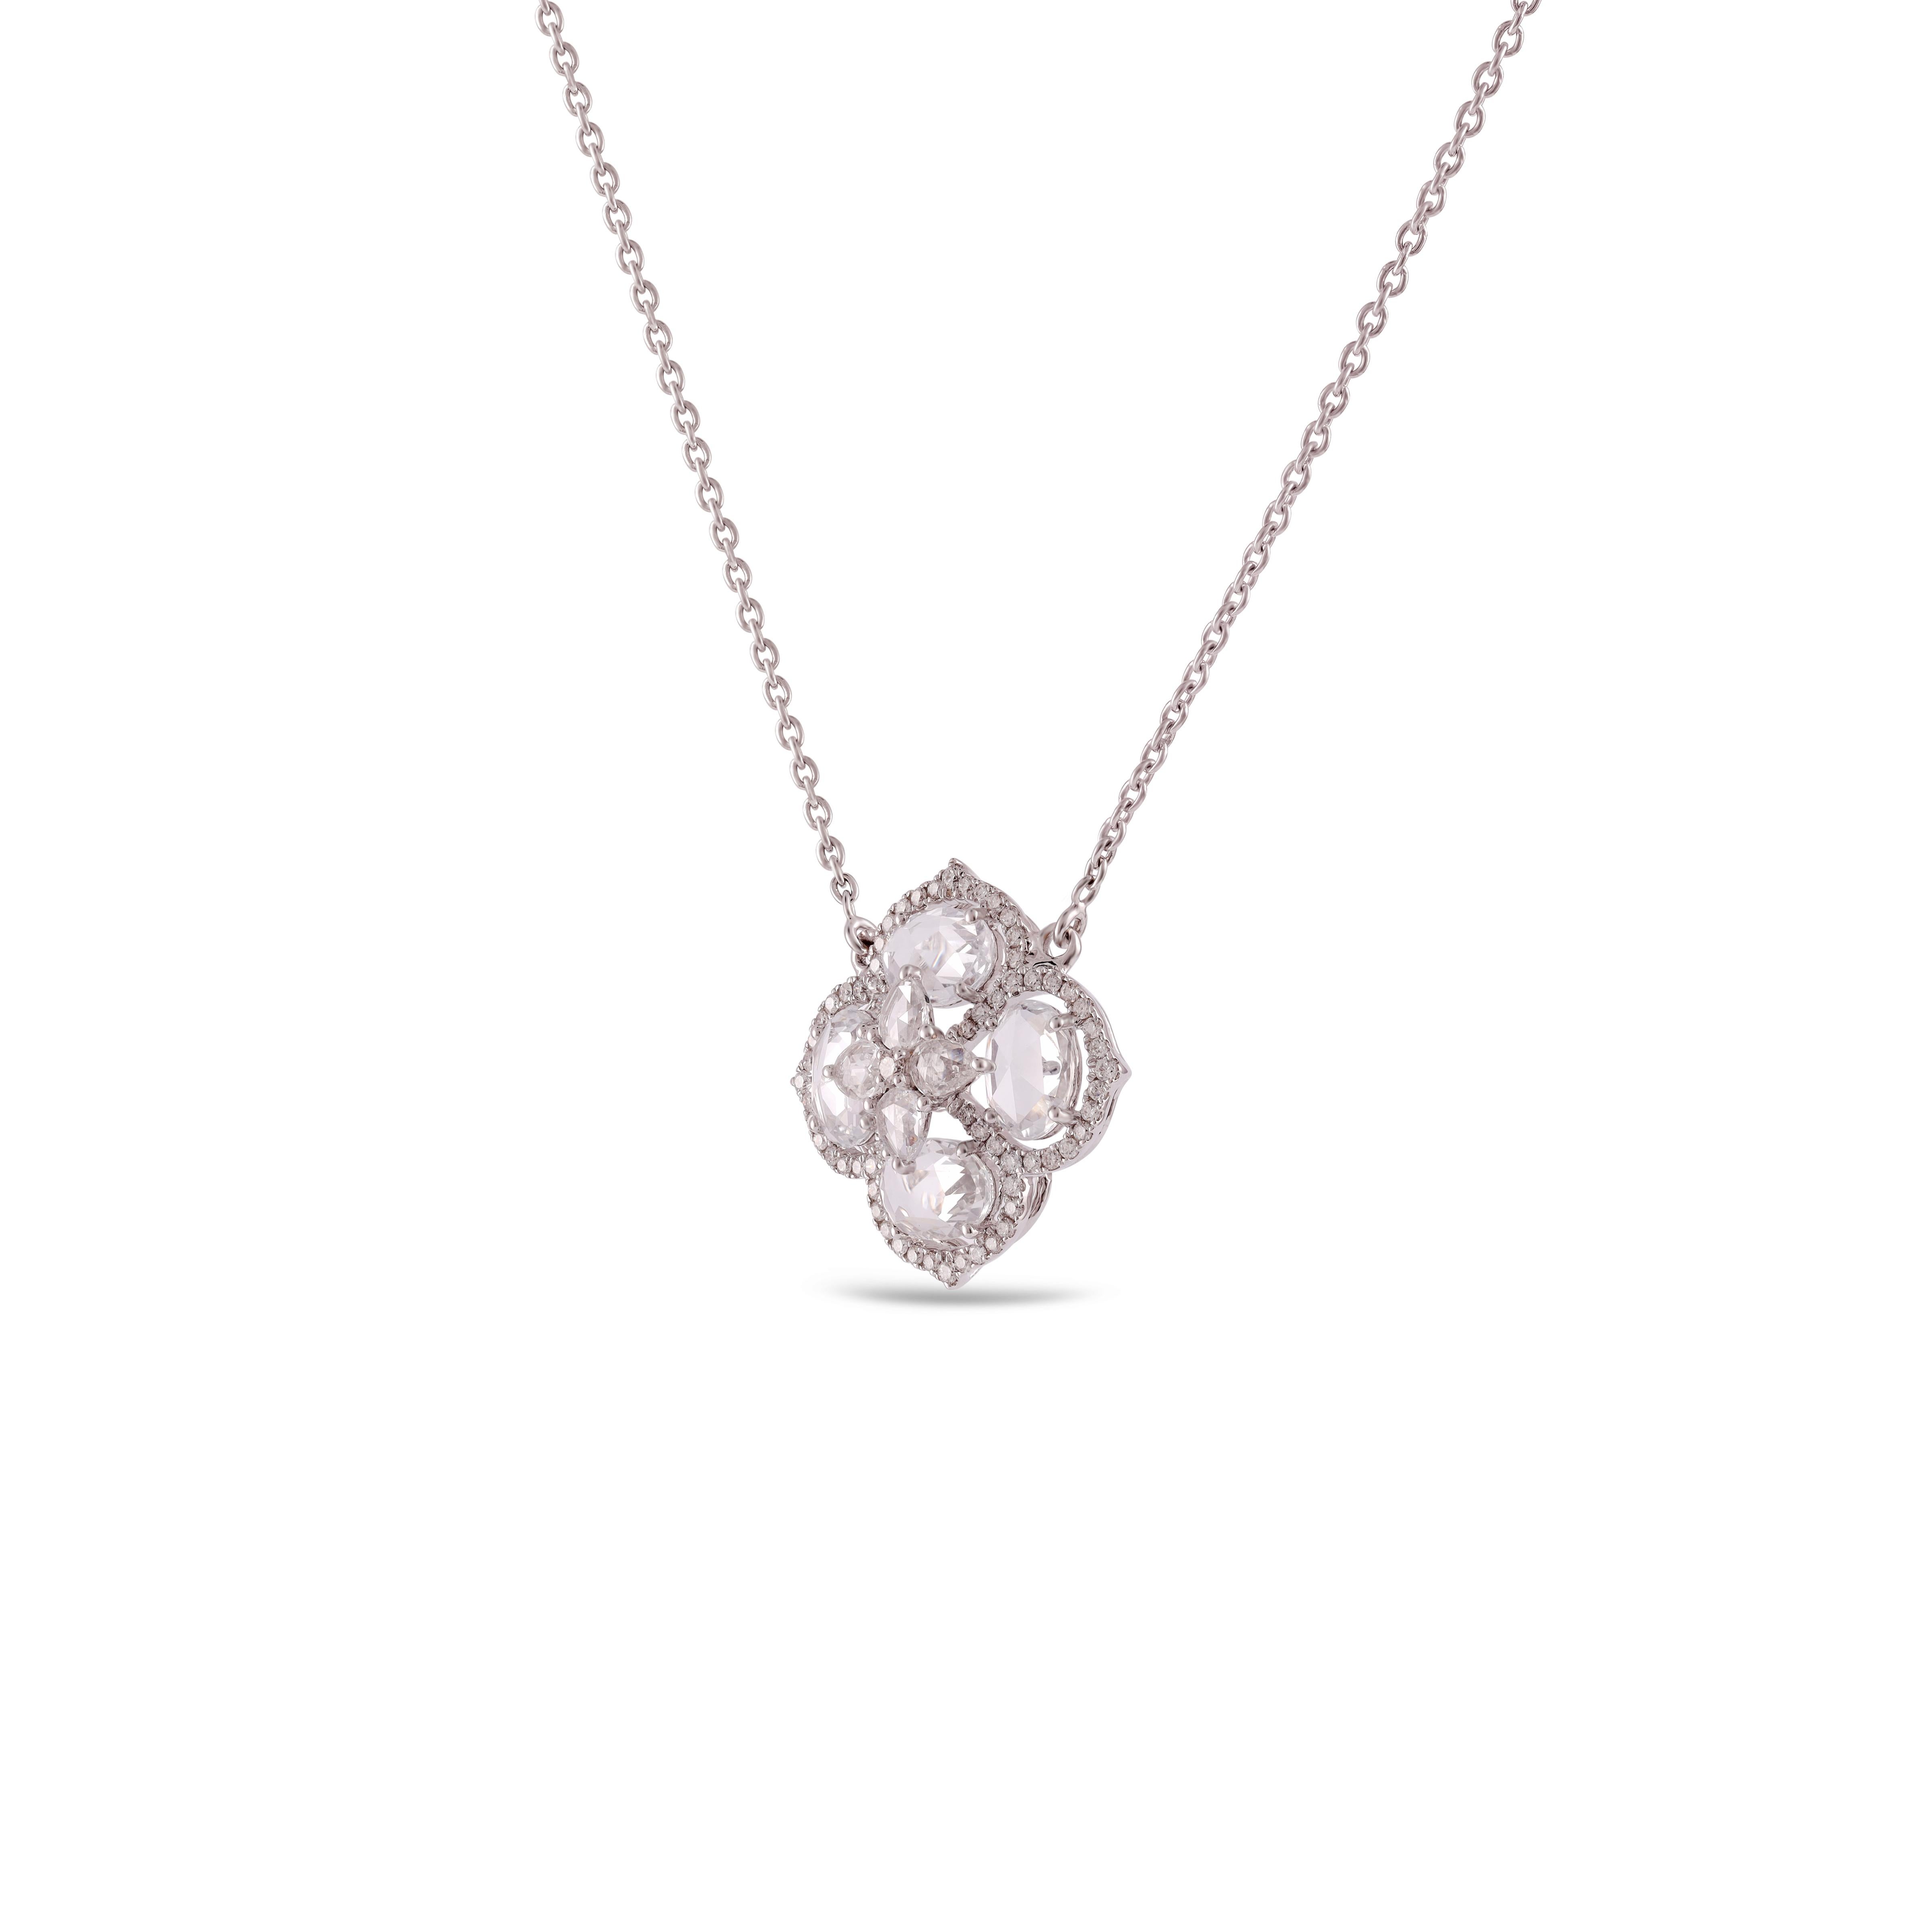 Oval Cut White Sapphire and Diamond Pendant Chain For Sale